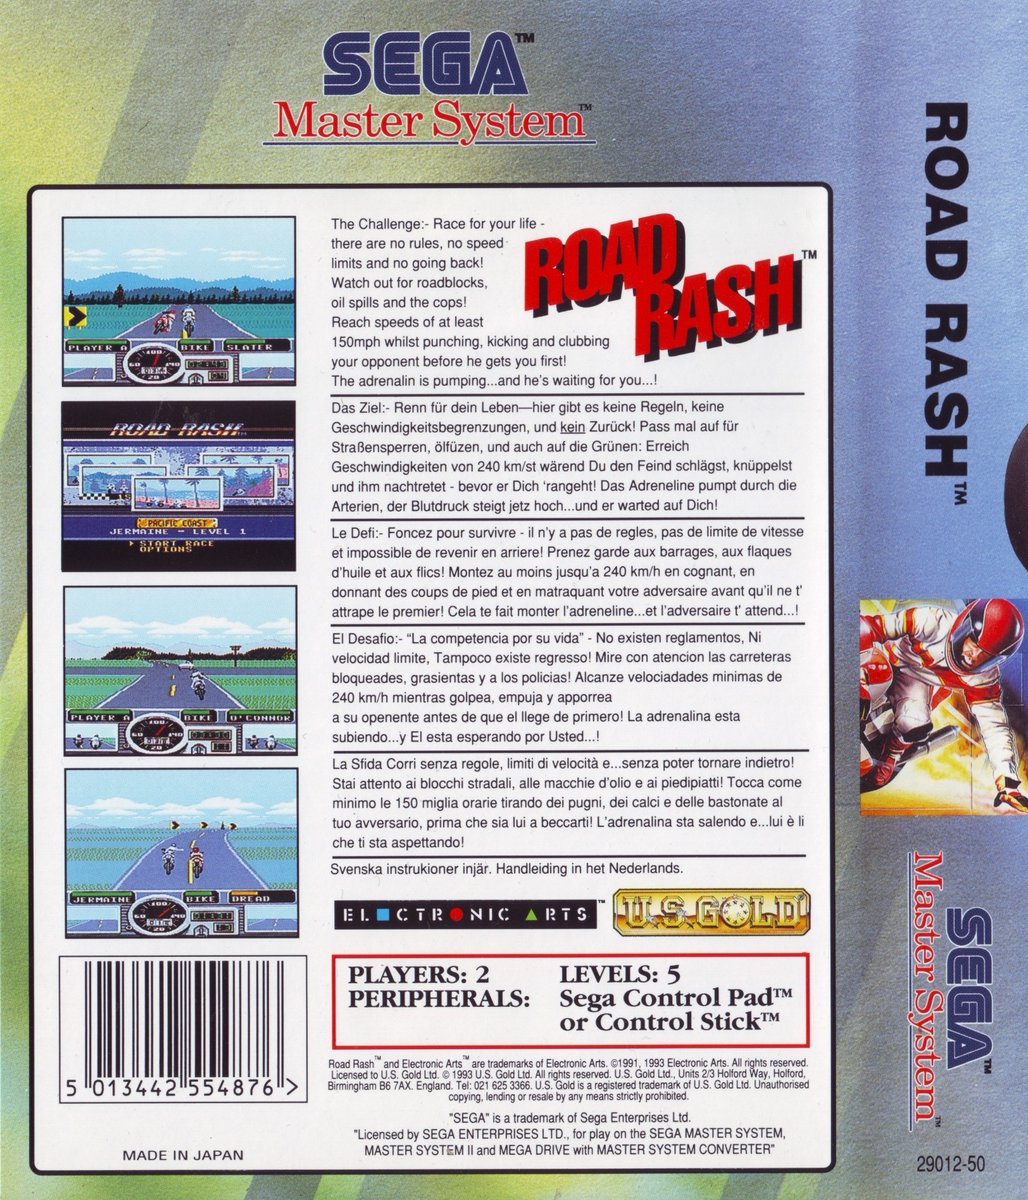 ROAD RASH: In 1994 Sega gamers took part in a series of street races in California. An excellent Master System port of the legendary 1991 Mega Drive/Genesis racing game this also came to other formats, did you ever knock an opponent of their bike? #retrogaming #Sega #90s #gaming